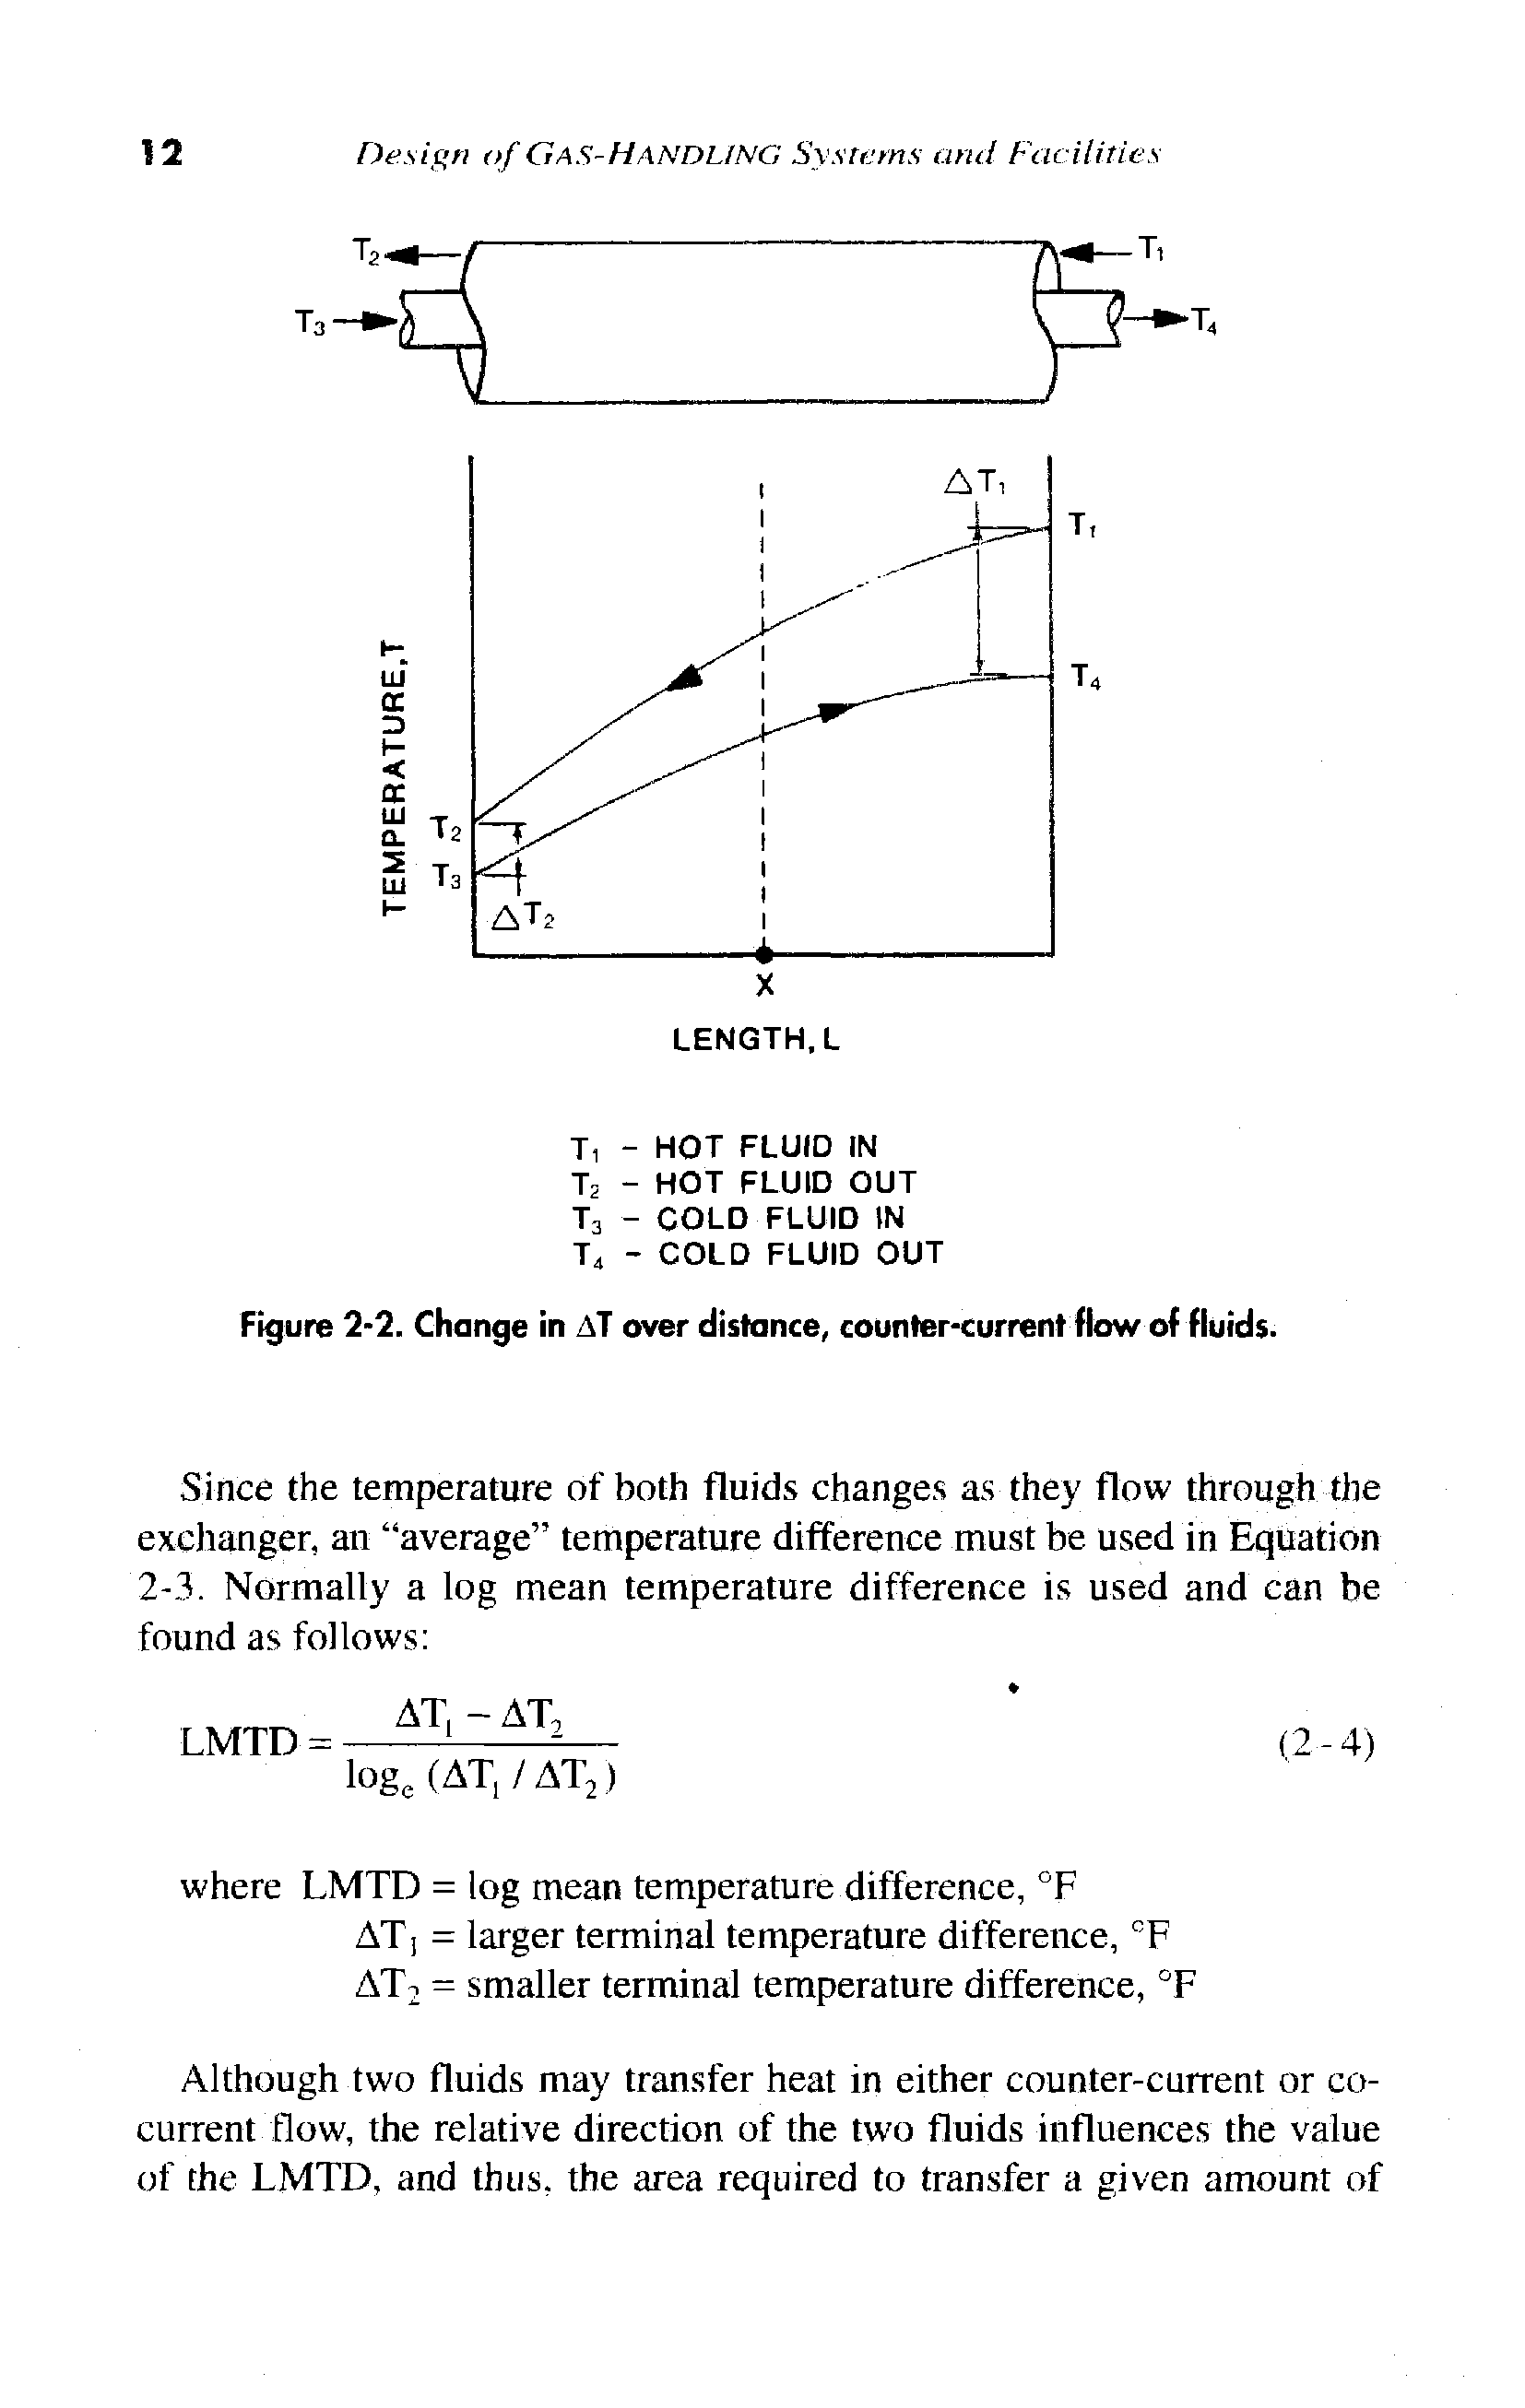 Figure 2-2. Change in AT over distance, counter-current flow of fluids.